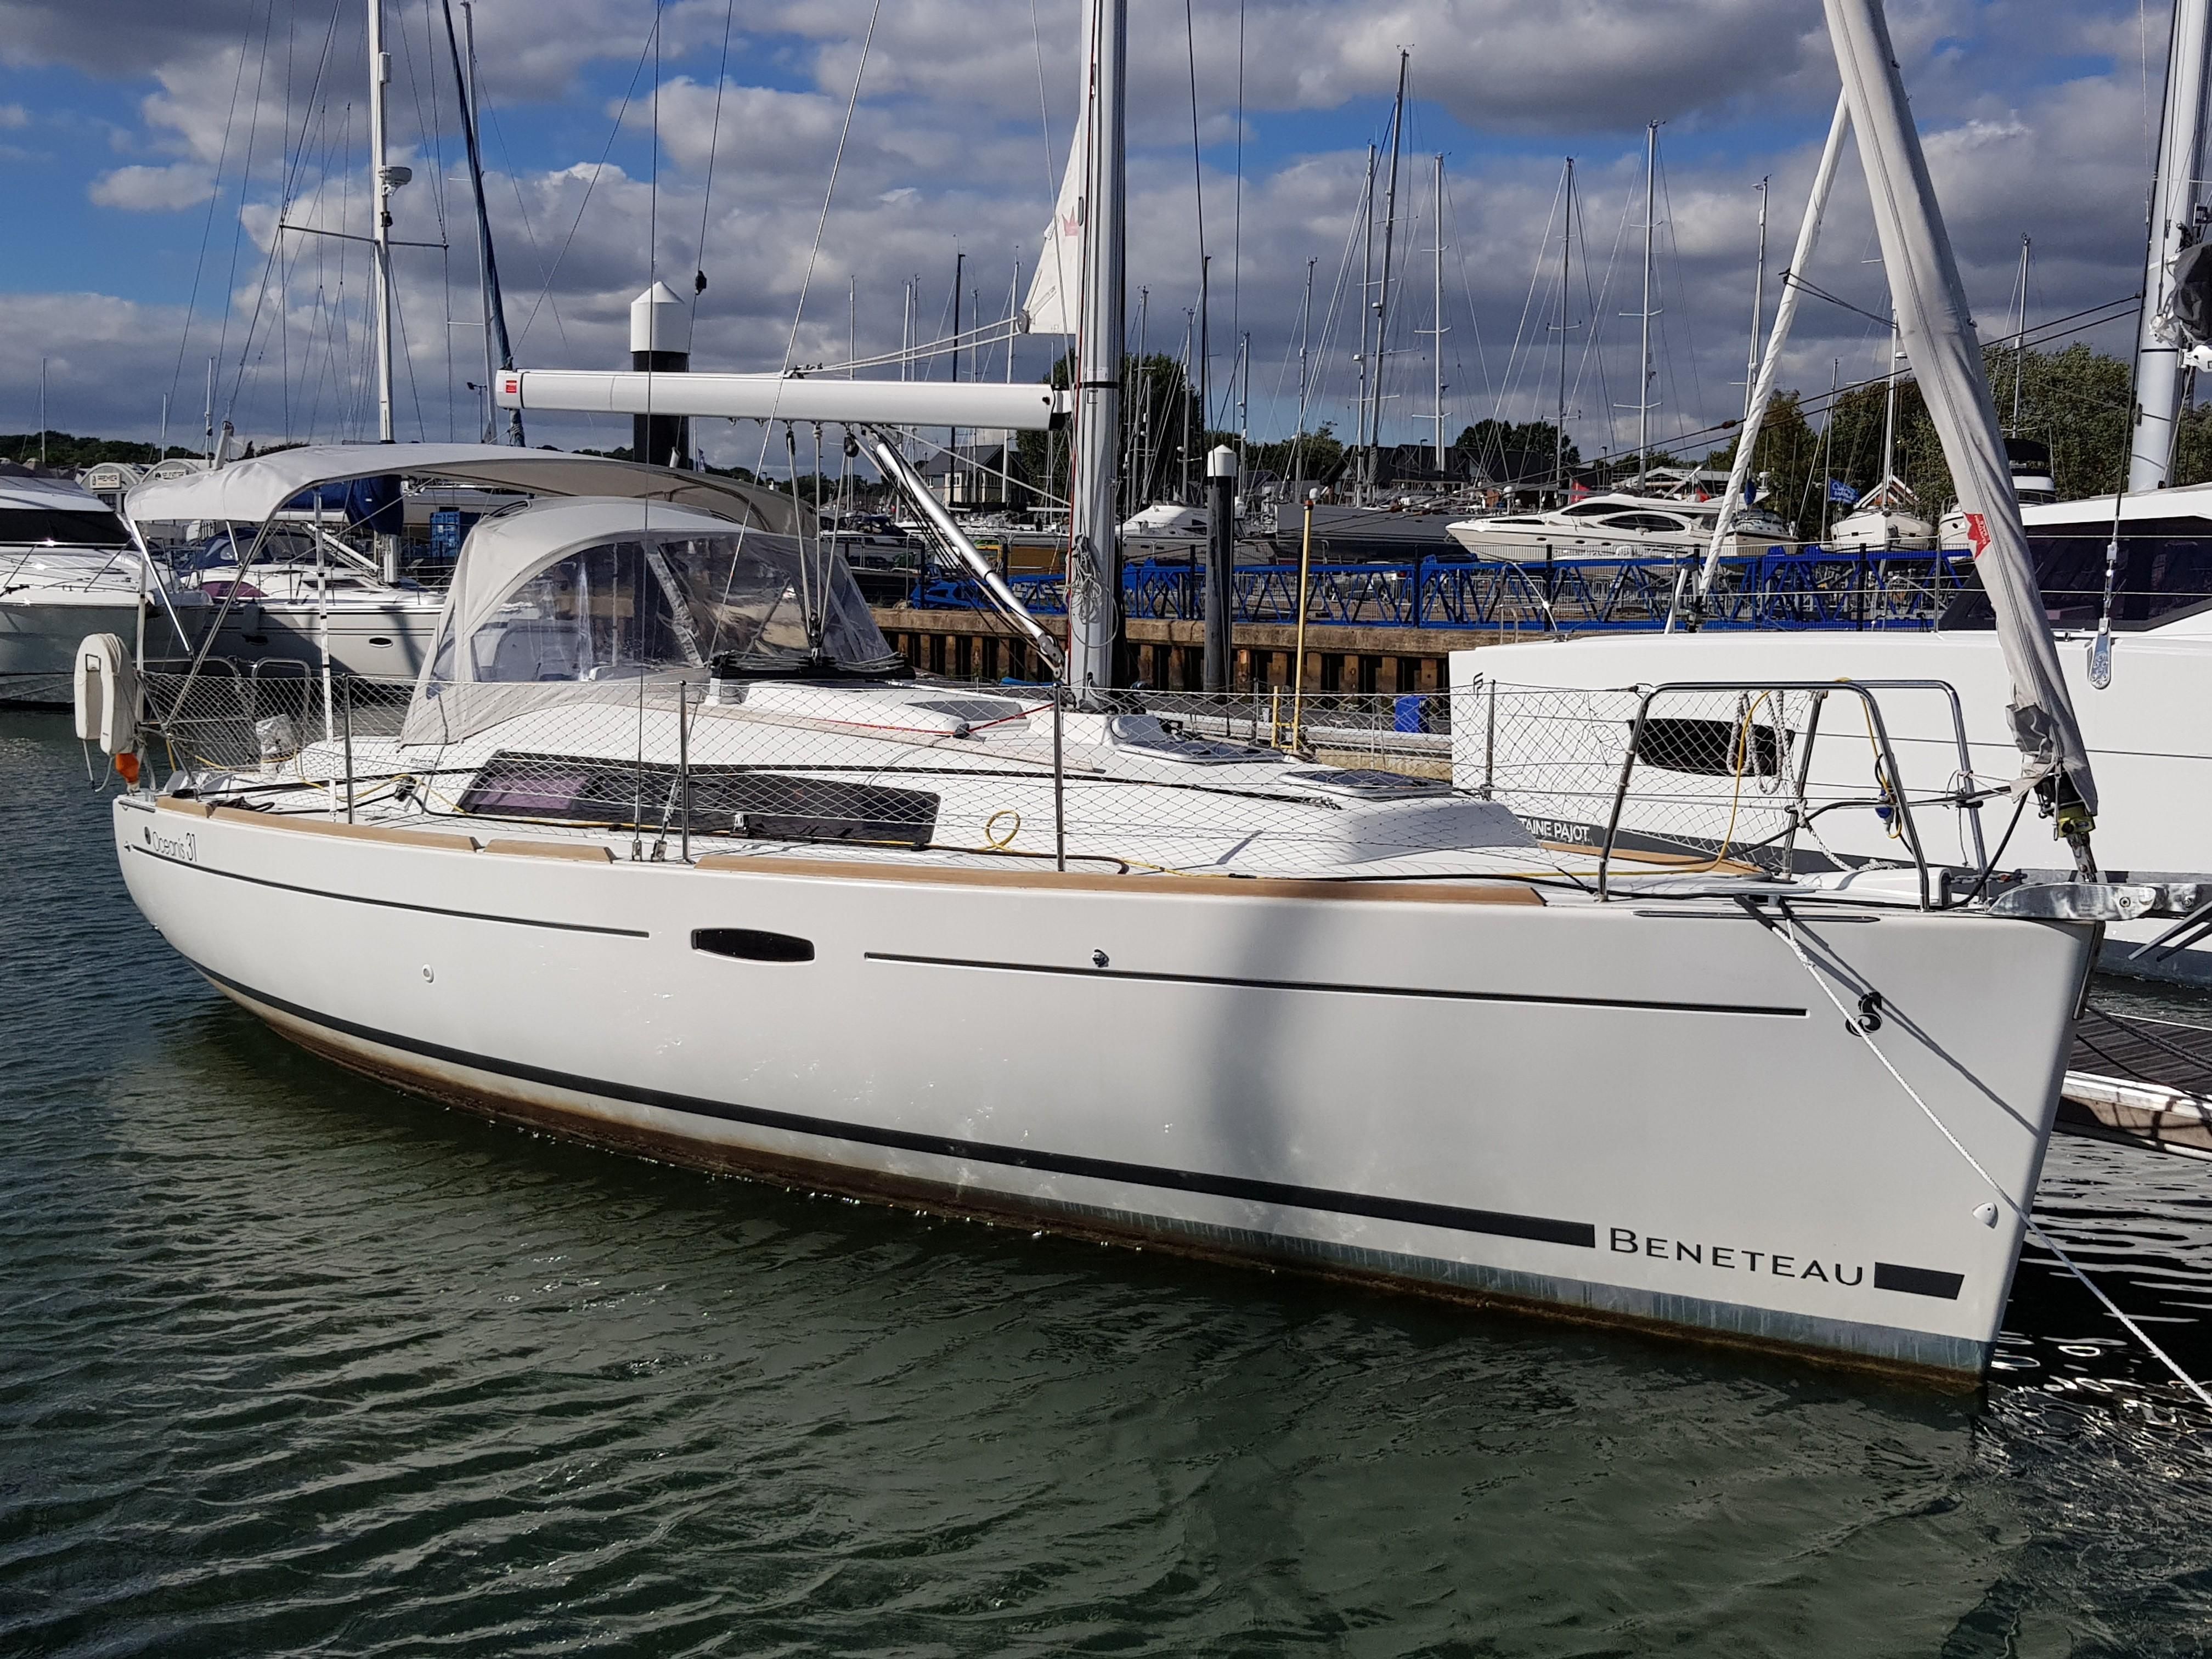 oceanis sailboats for sale